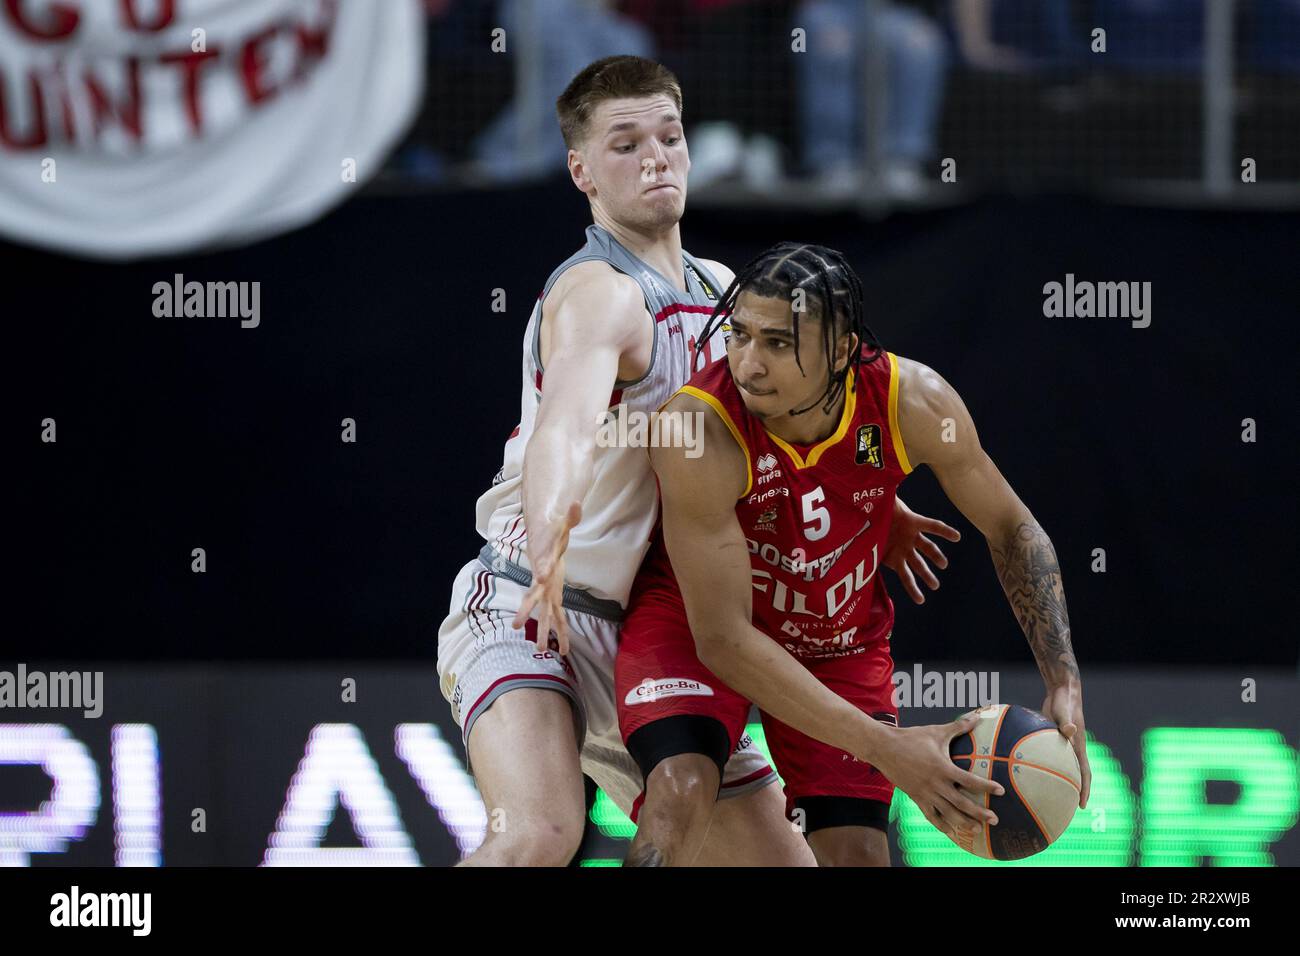 Antwerpen, Belgium. 21st May, 2023. Antwerp's Thijs De Ridder and  Oostende's Breein Tyree pictured in action during a basketball match  between Antwerp Giants and BC Oostende, Sunday 21 May 2023 in Antwerp,